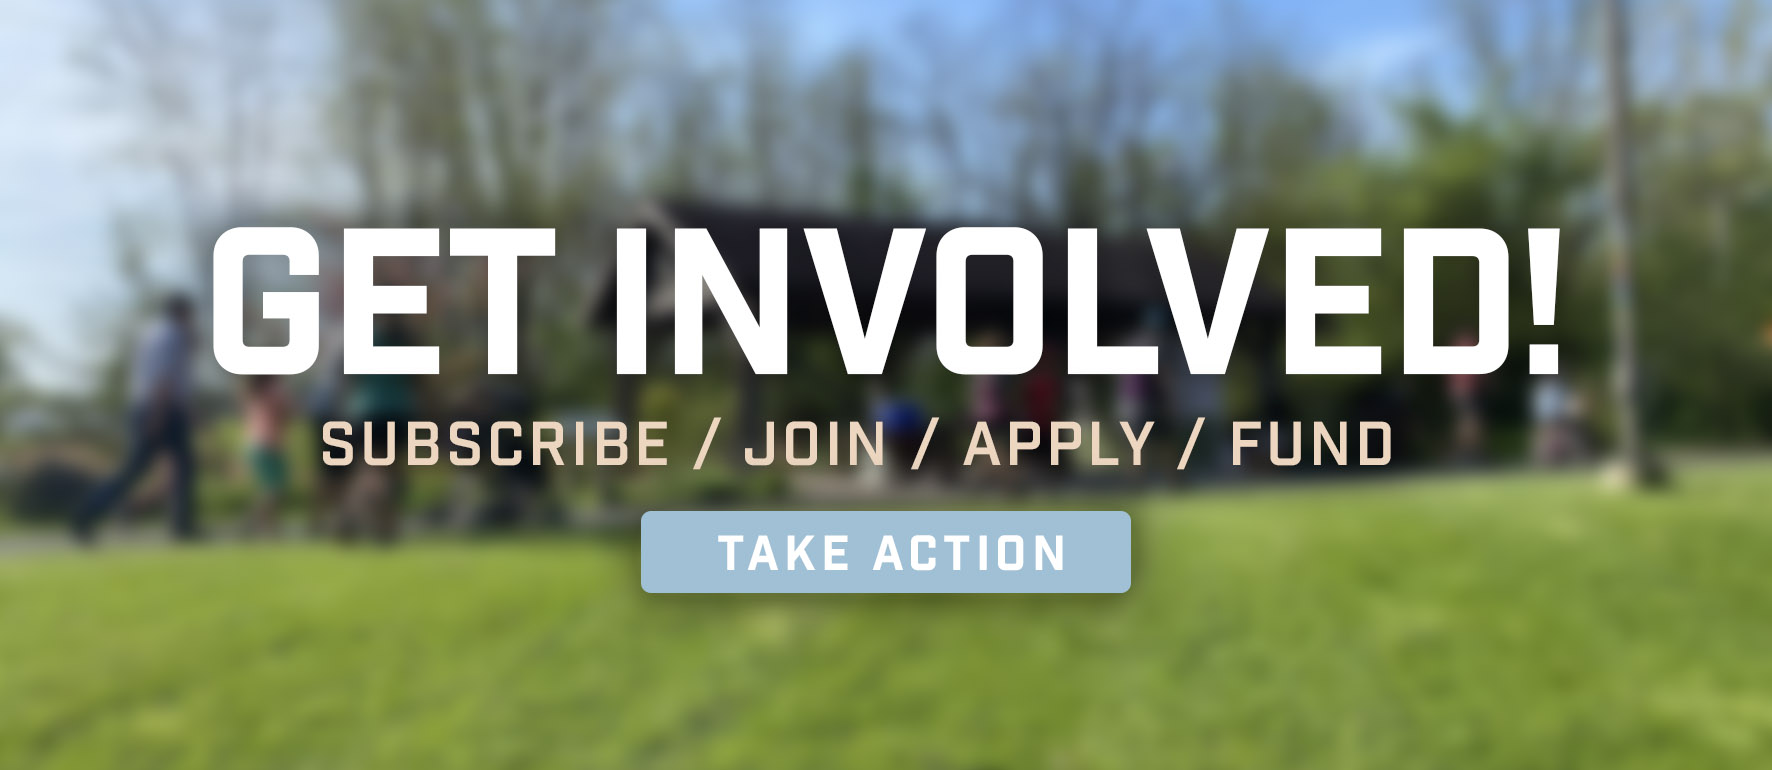 Get Involved - Take Action